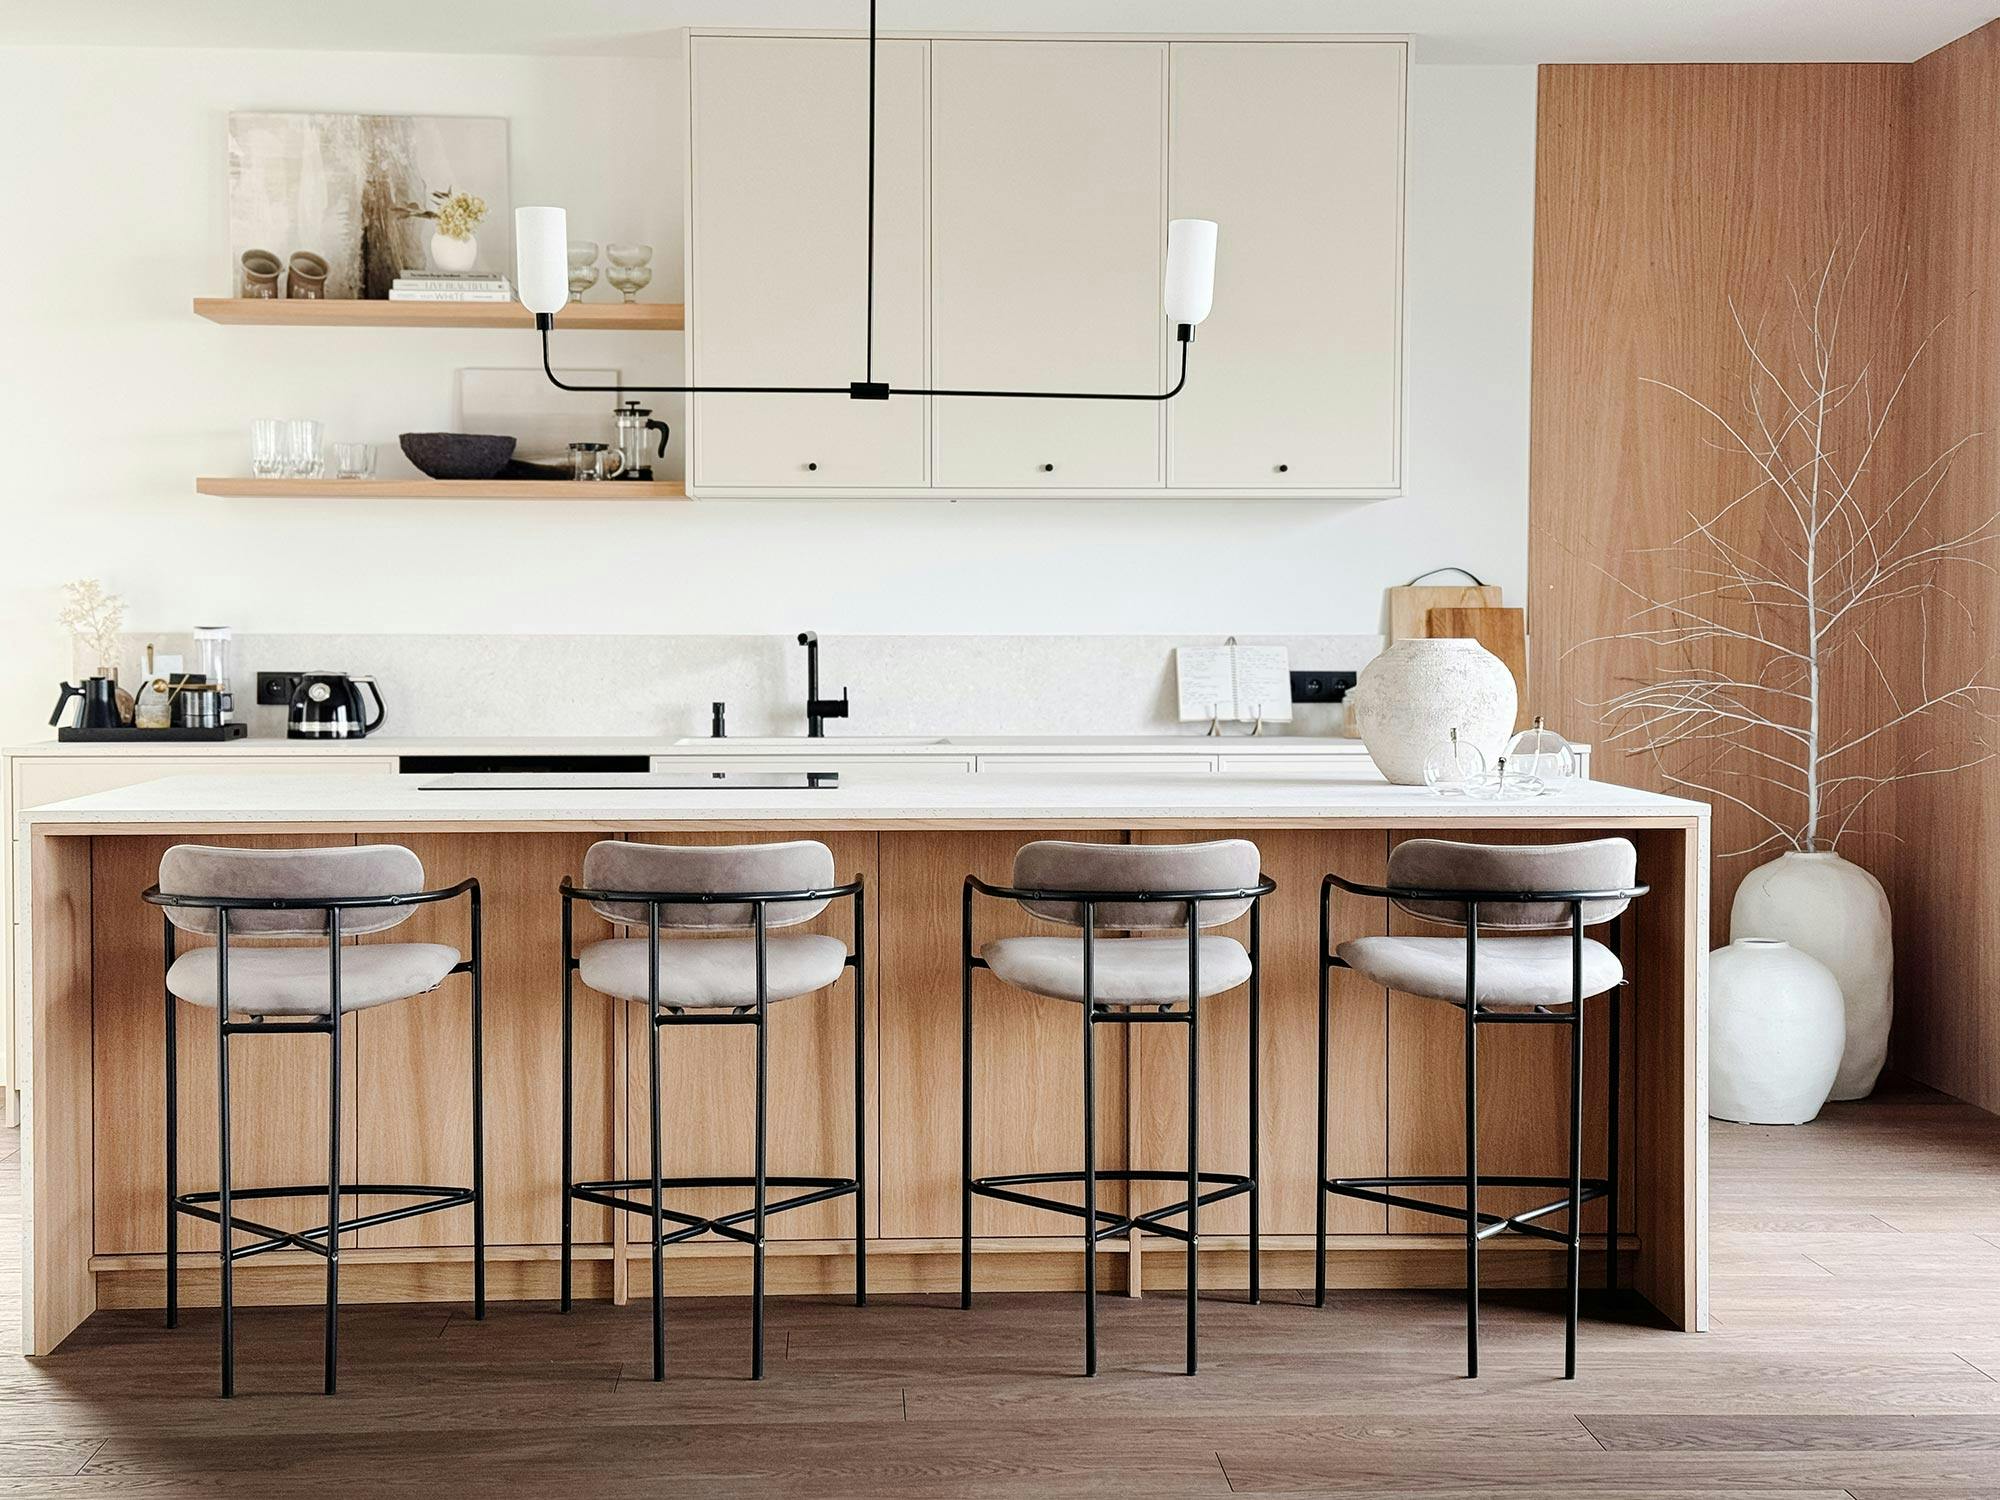 Image of House Loves 15.jpg?auto=format%2Ccompress&ixlib=php 3.3 in {{All in beige: a personal kitchen that blends styles by House Loves}} - Cosentino